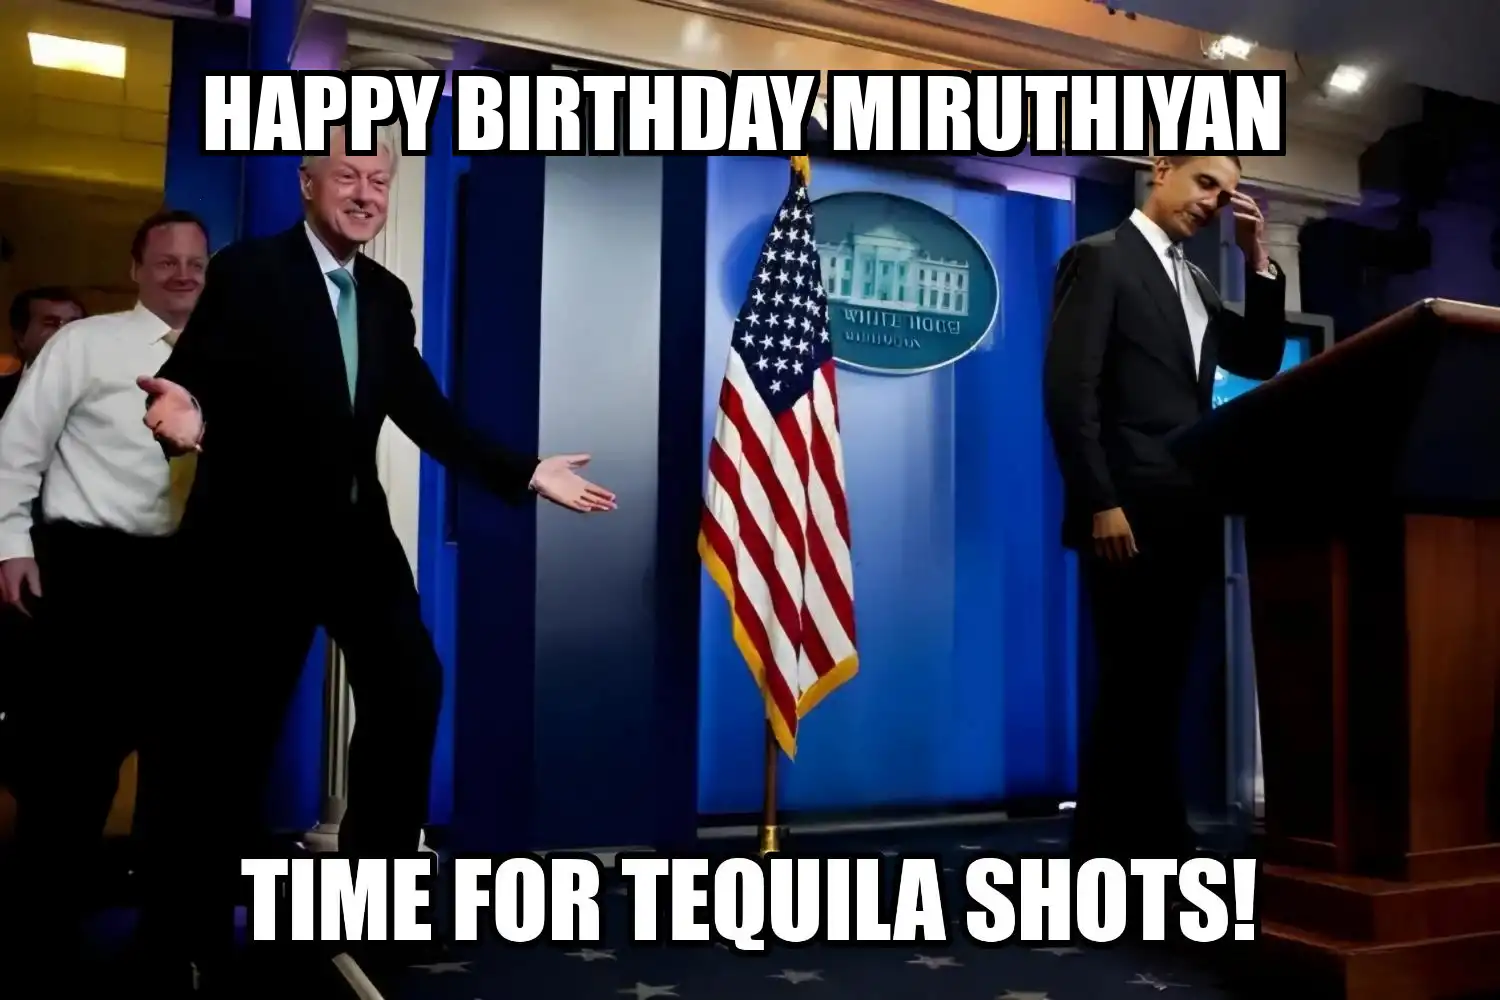 Happy Birthday Miruthiyan Time For Tequila Shots Memes